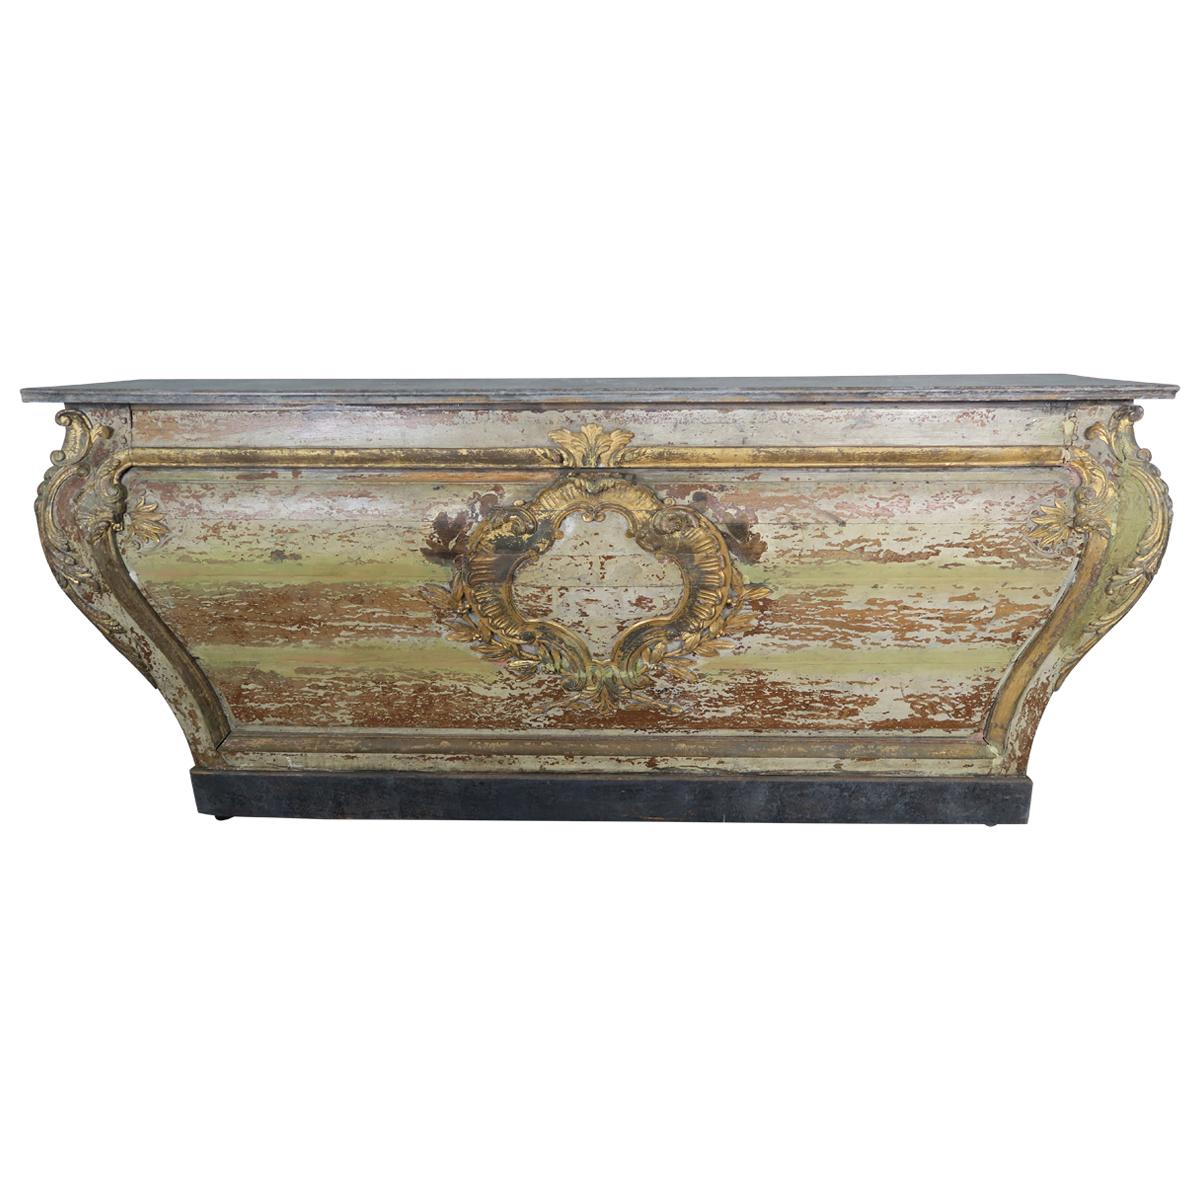 19th Century Italian Painted Console with Cartouche